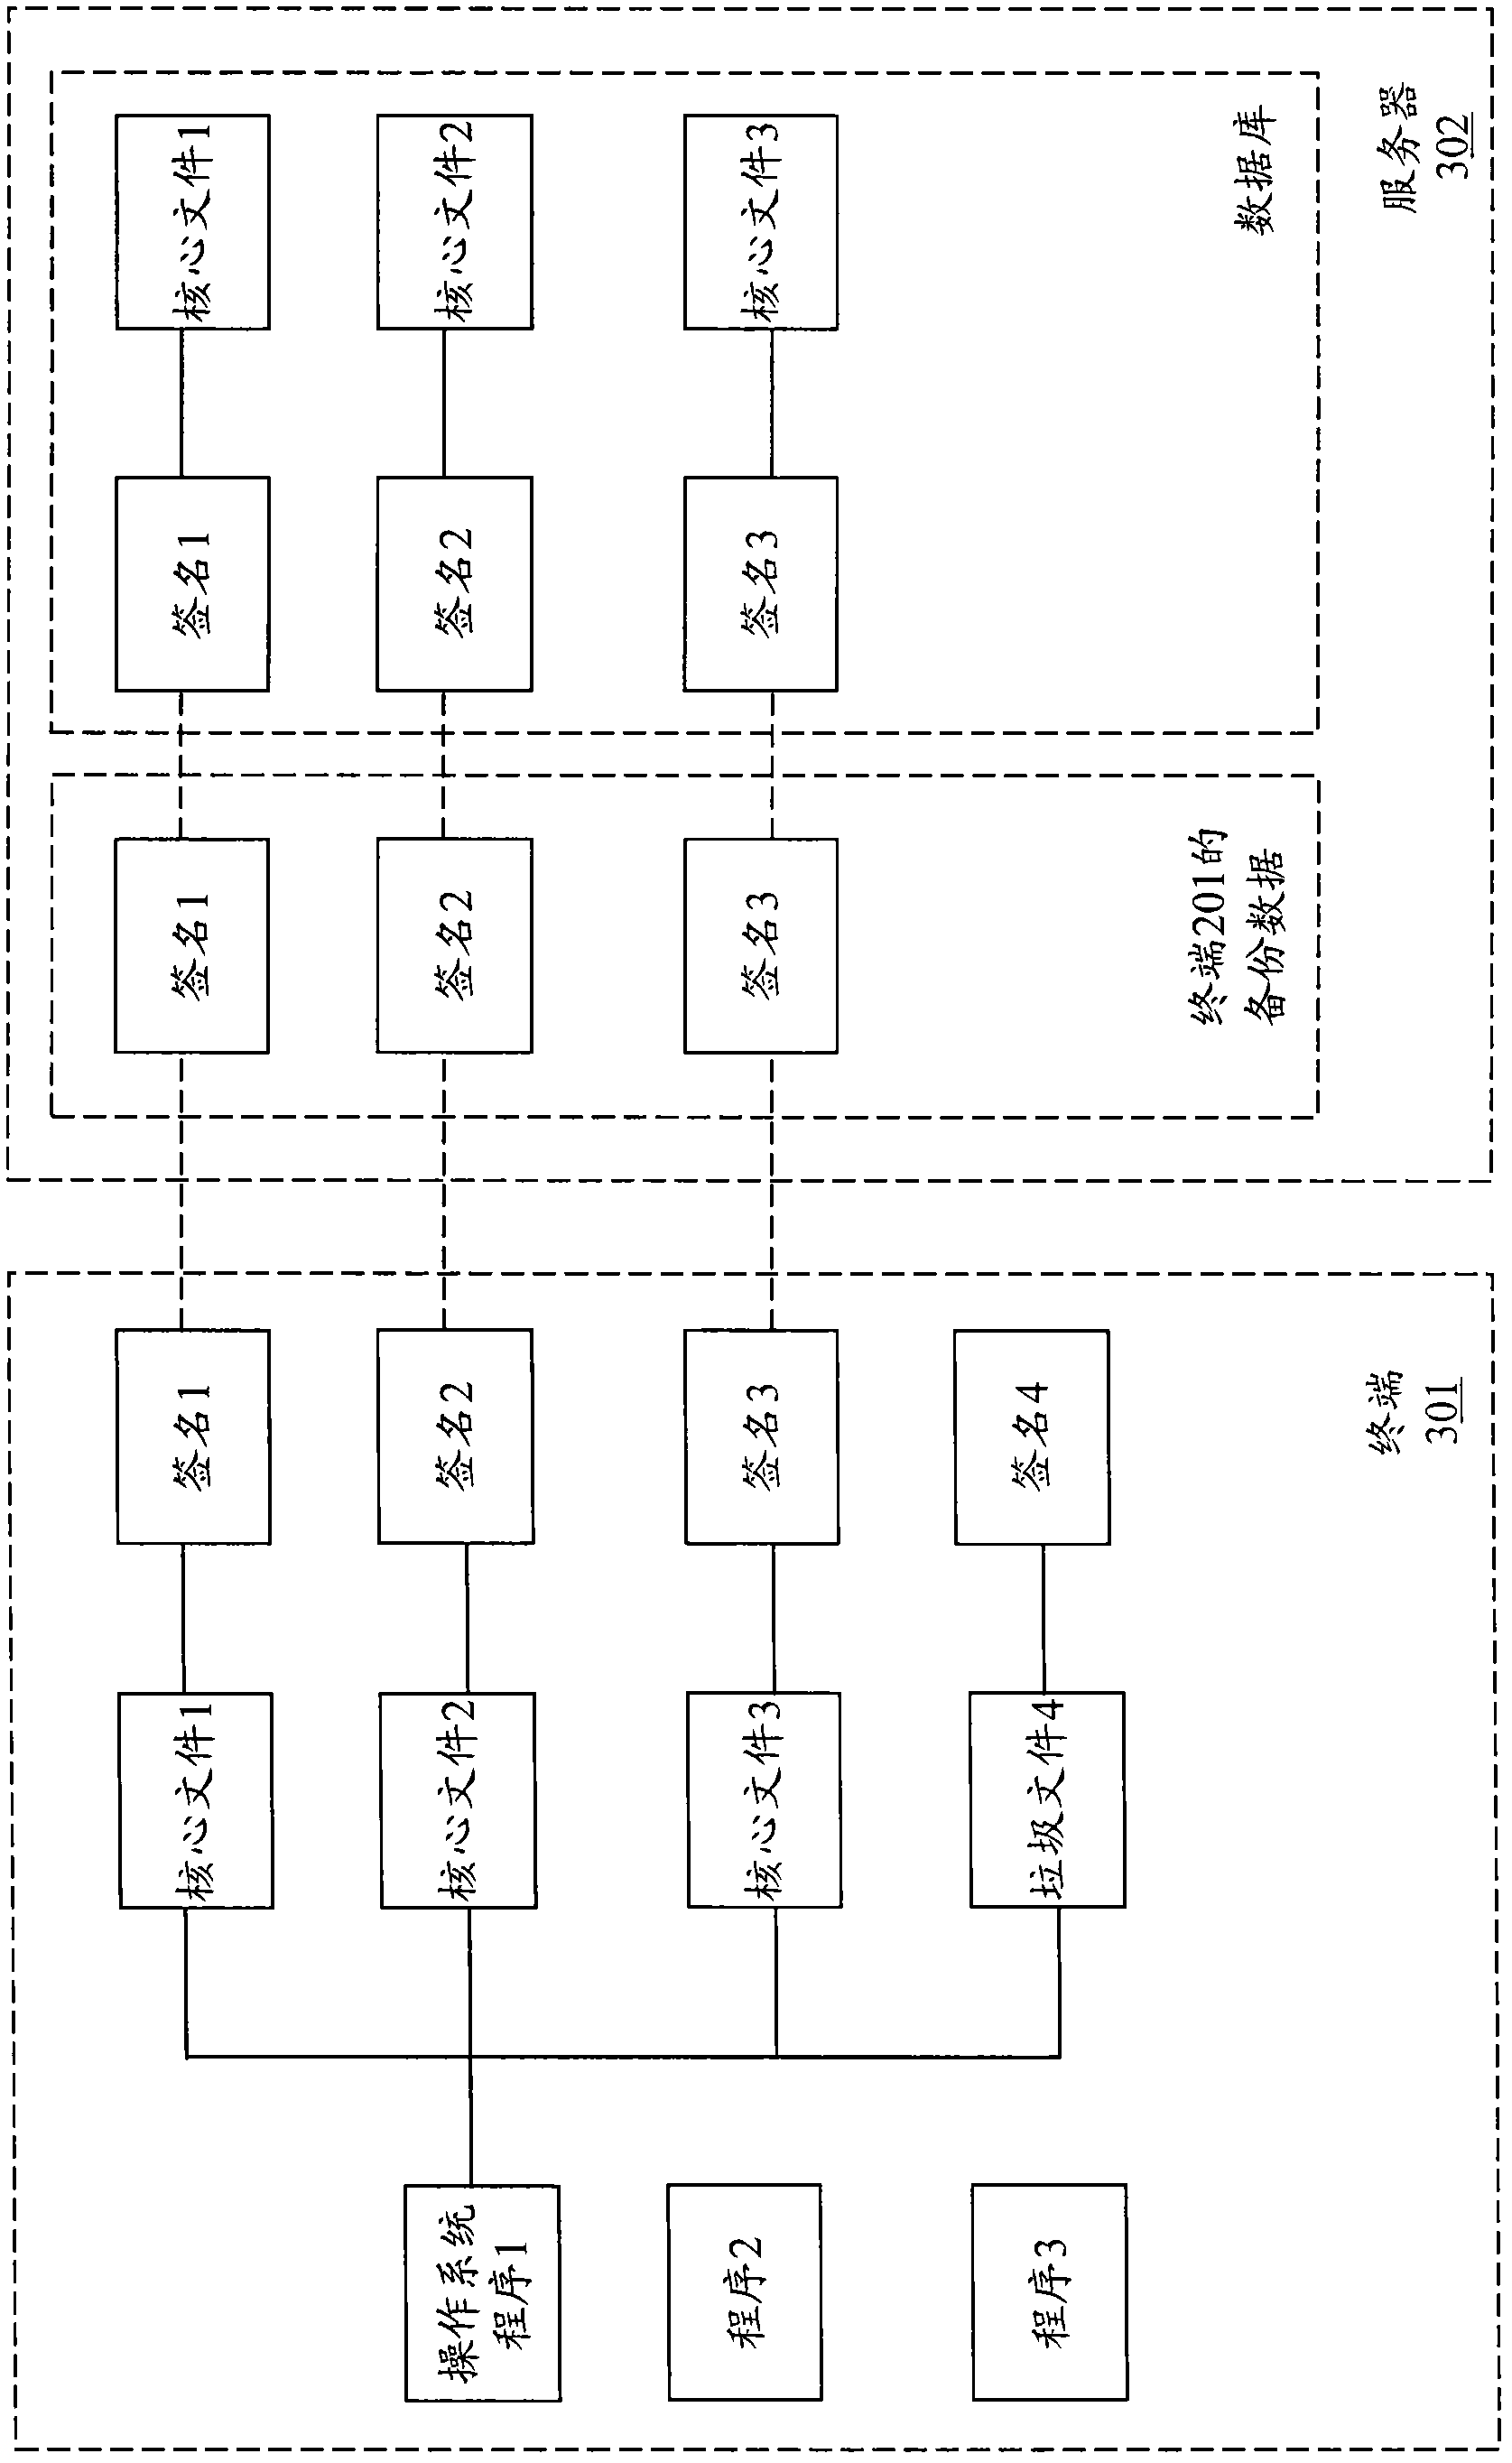 Terminal backup object sharing and recovery method based on cloud architecture